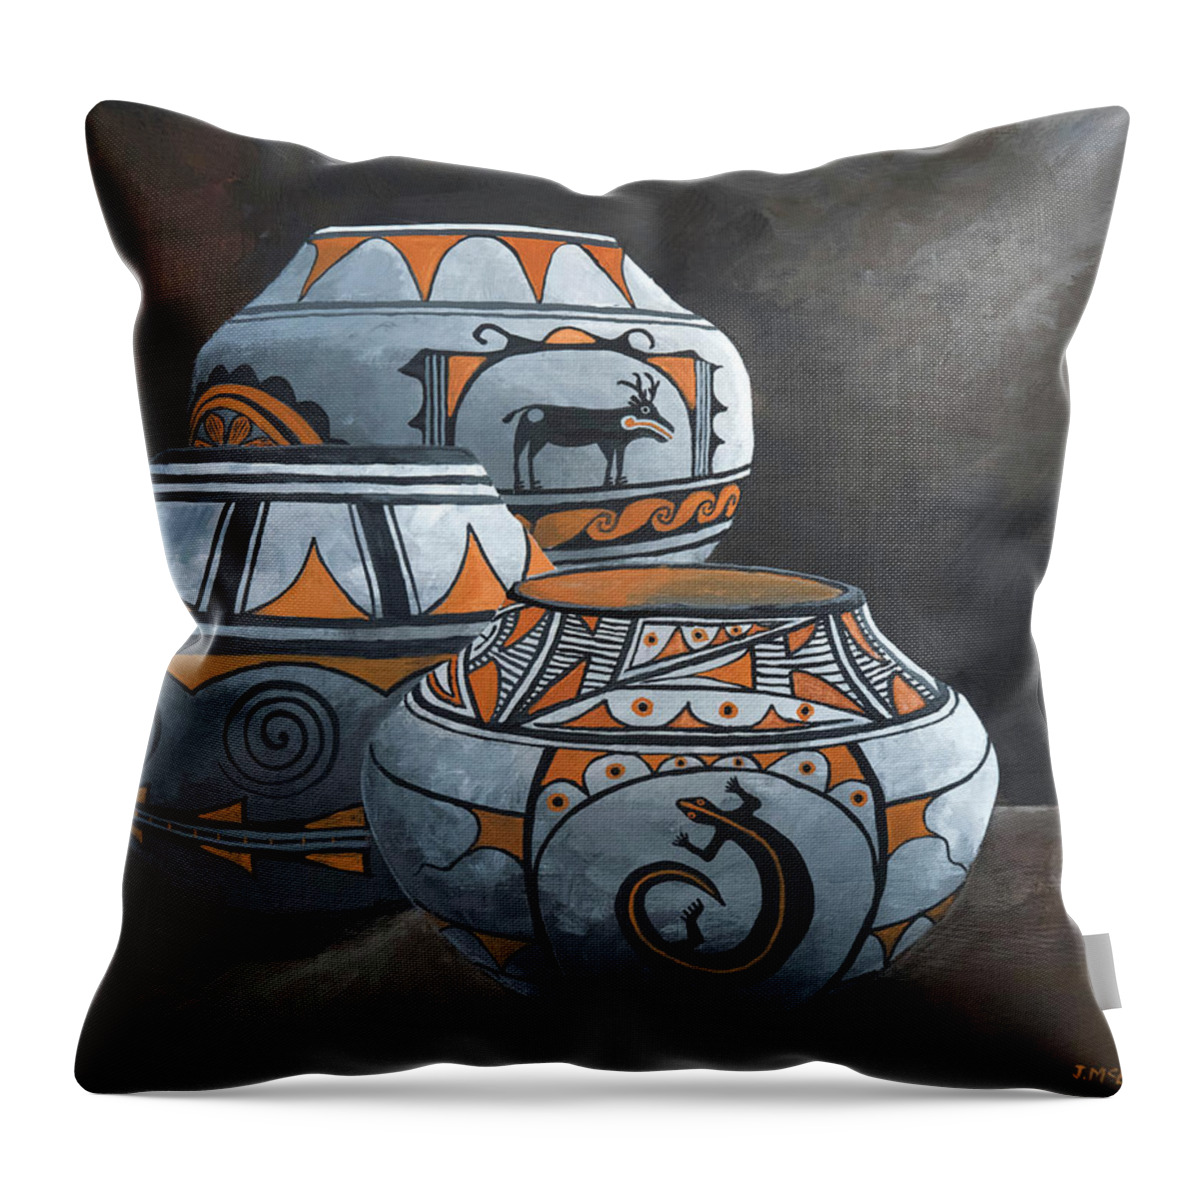 Hopi Throw Pillow featuring the painting Hopi Pots by Jerry McElroy